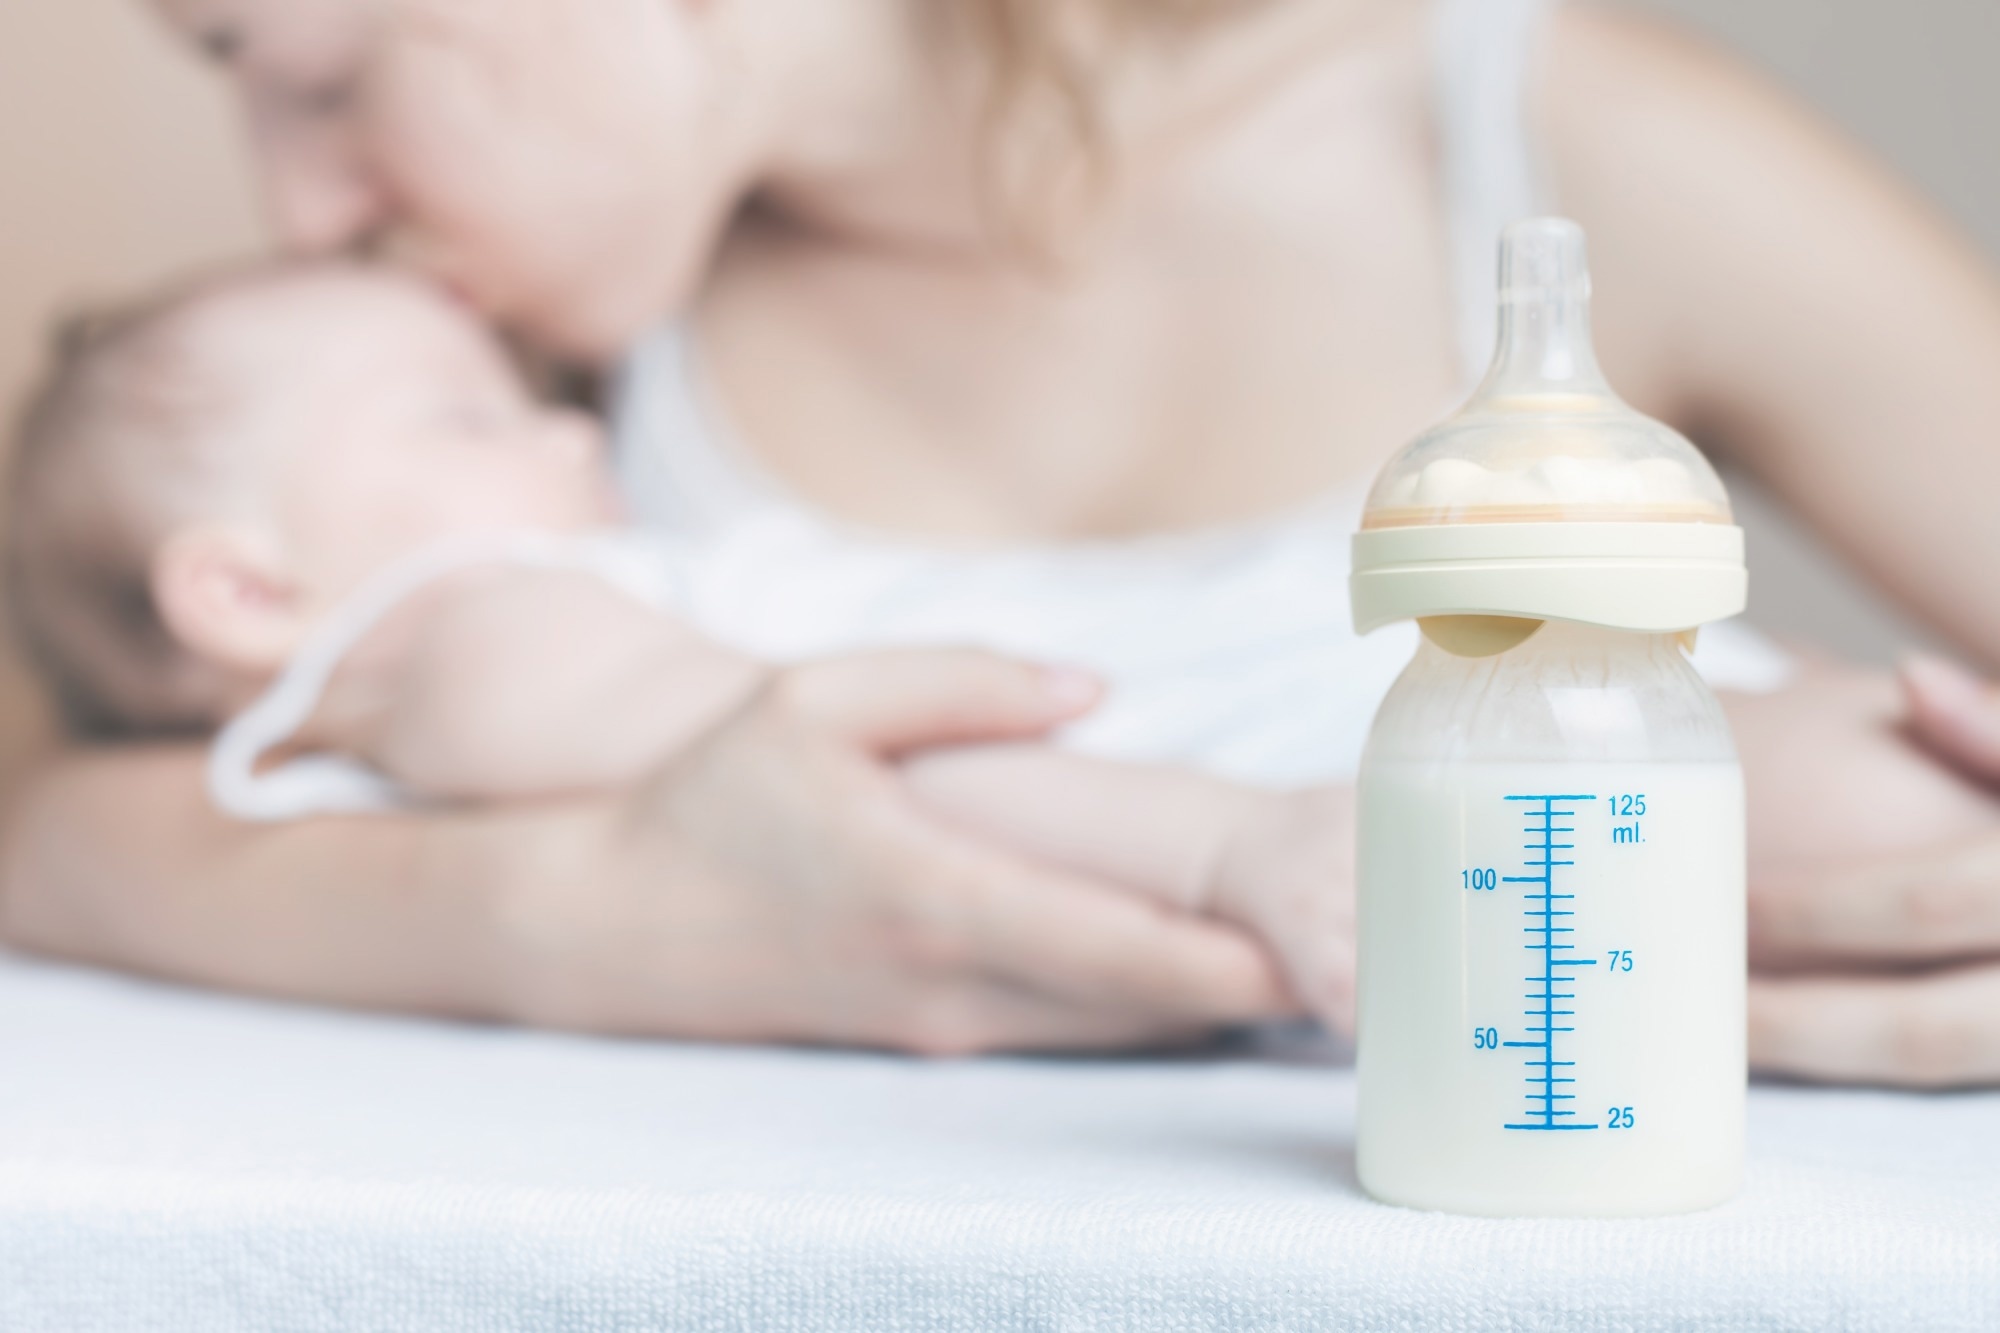 Study: Impact of maternal SARS-CoV-2 booster vaccination on blood and breastmilk antibodies. Image Credit: avelIlyukhin/Shutterstock.com